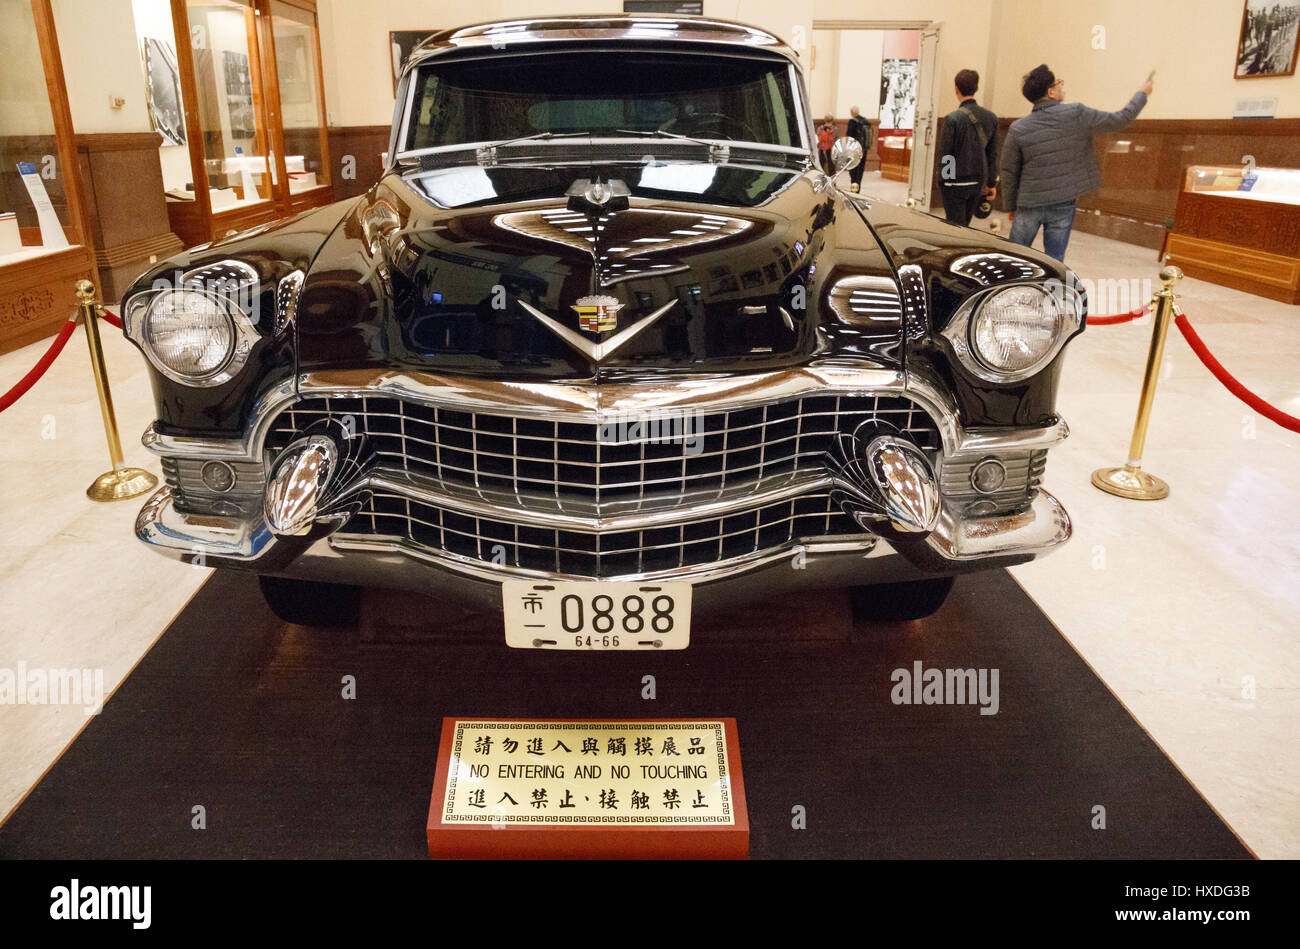 [Editorial Use Only] TAIWAN, TAIPEI CITY: Former president of the Republic of China Chiang Kai-shek's 1955 Cadillac Series 75 Stock Photo